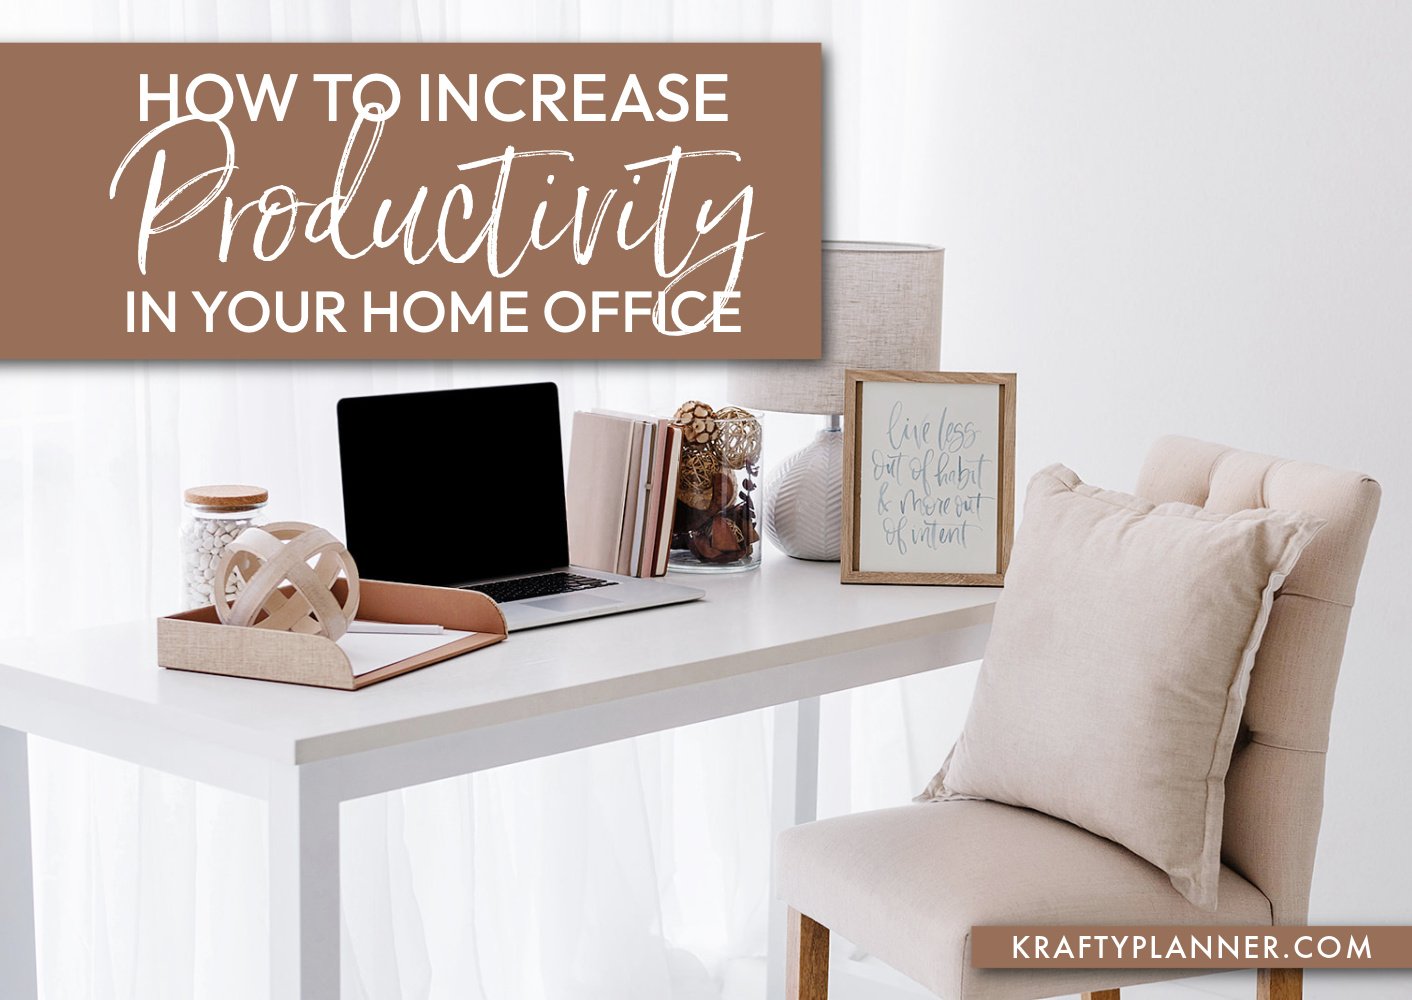 How to Increase Productivity in Your Home Office